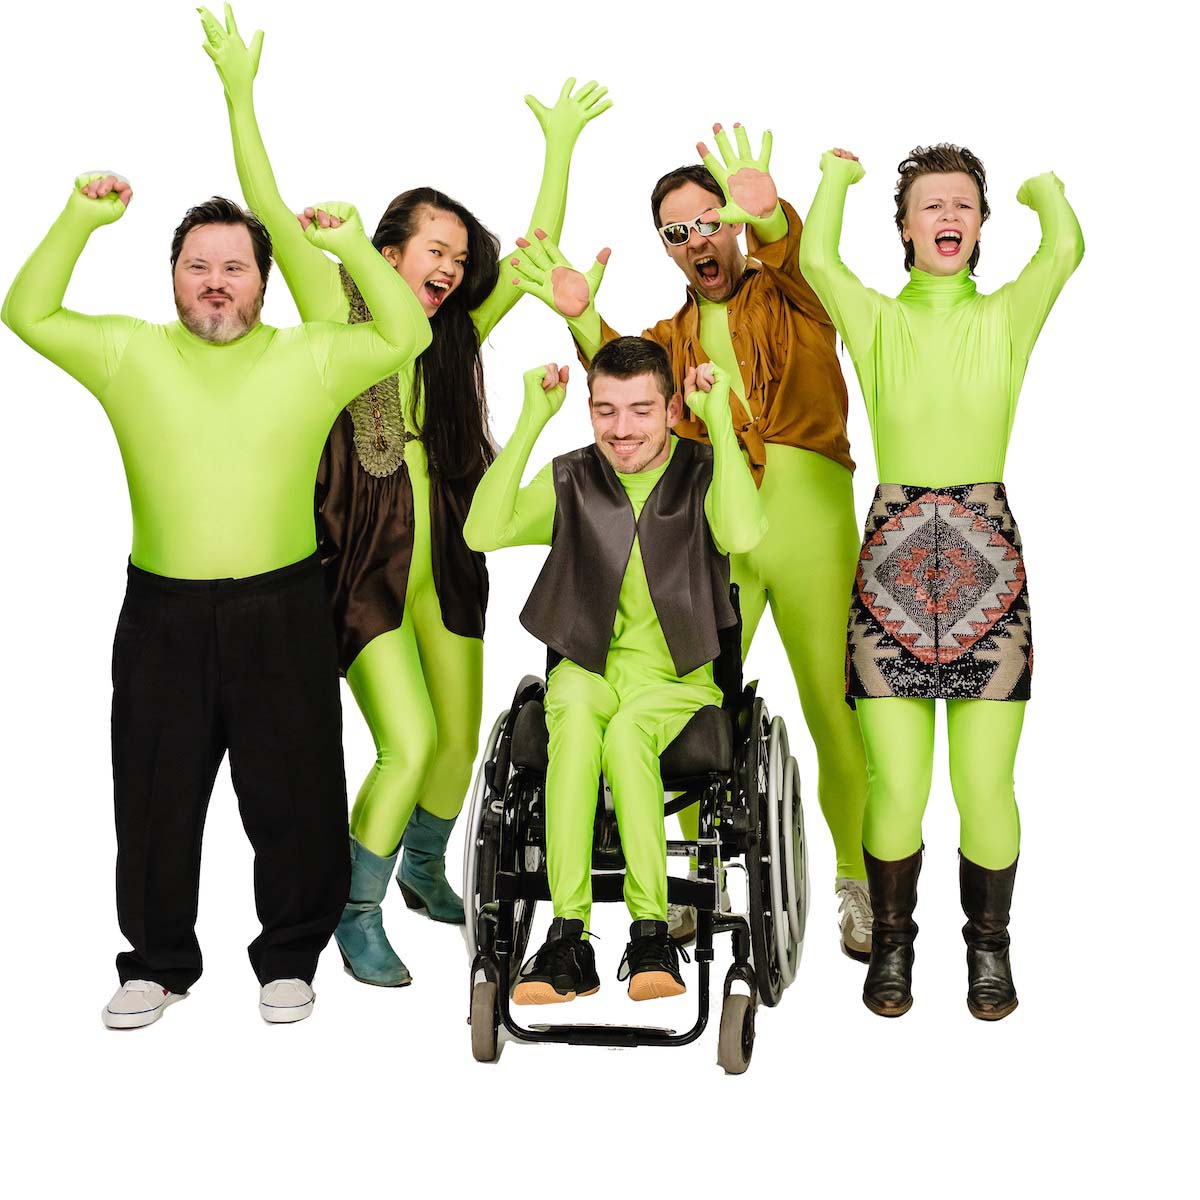 The band 21 downbeat can be seen, consisting of two women and three men in tight light green full-body suits, over each of which they wear another, everyday item of clothing such as trousers, waistcoat, skirt, shirt and blouse, jubilantly throwing their hands up and showing facial expressions of joy - with open mouths and smiles. Four of the people are standing next to and behind a man sitting in a wheelchair in the centre of the picture. The background is completely white, the picture looks cropped.